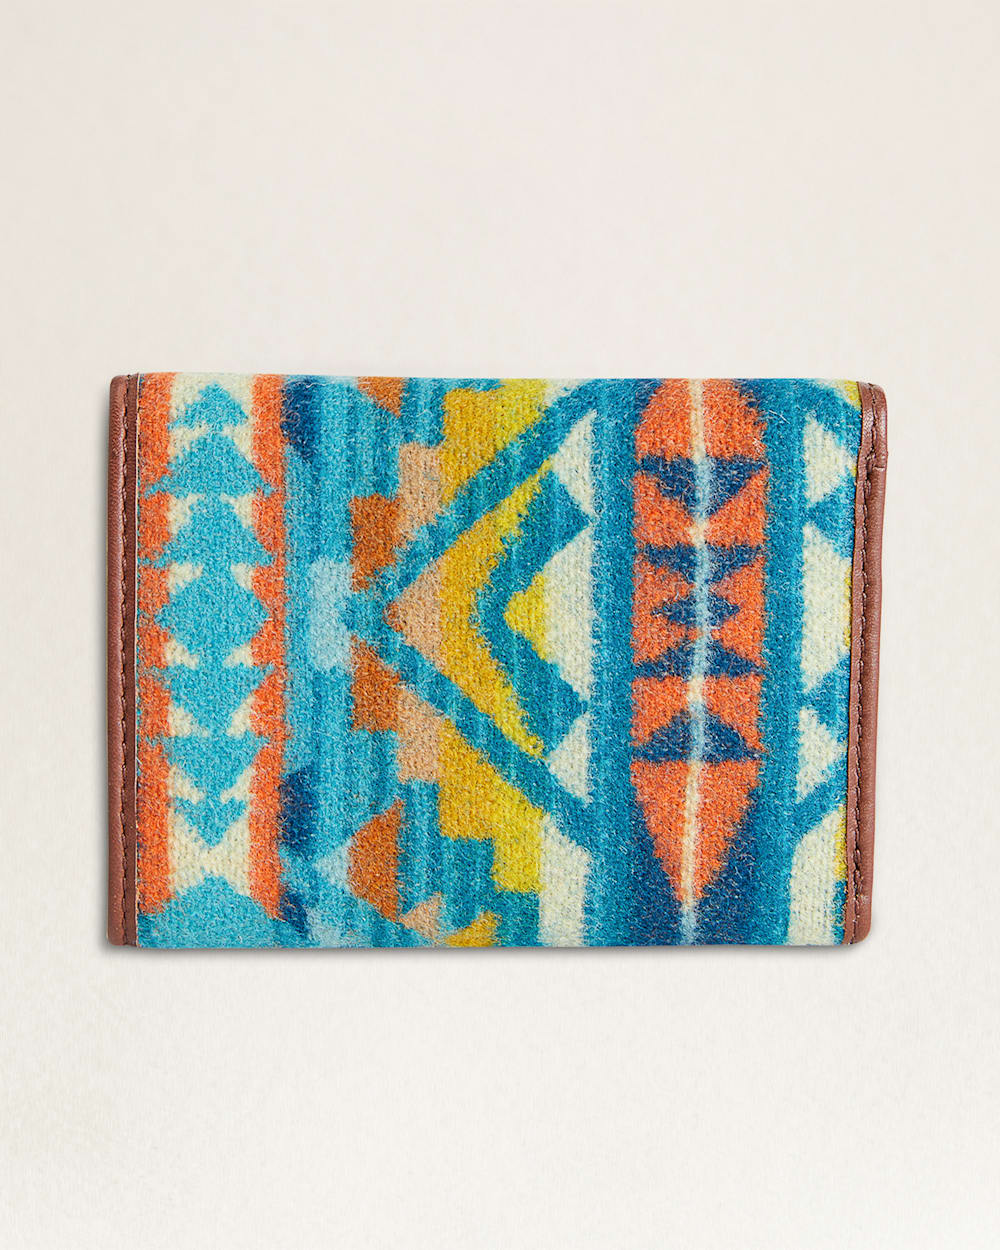 ALTERNATE VIEW OF TRIFOLD WALLET IN TURQUOISE ALTO MESA image number 2